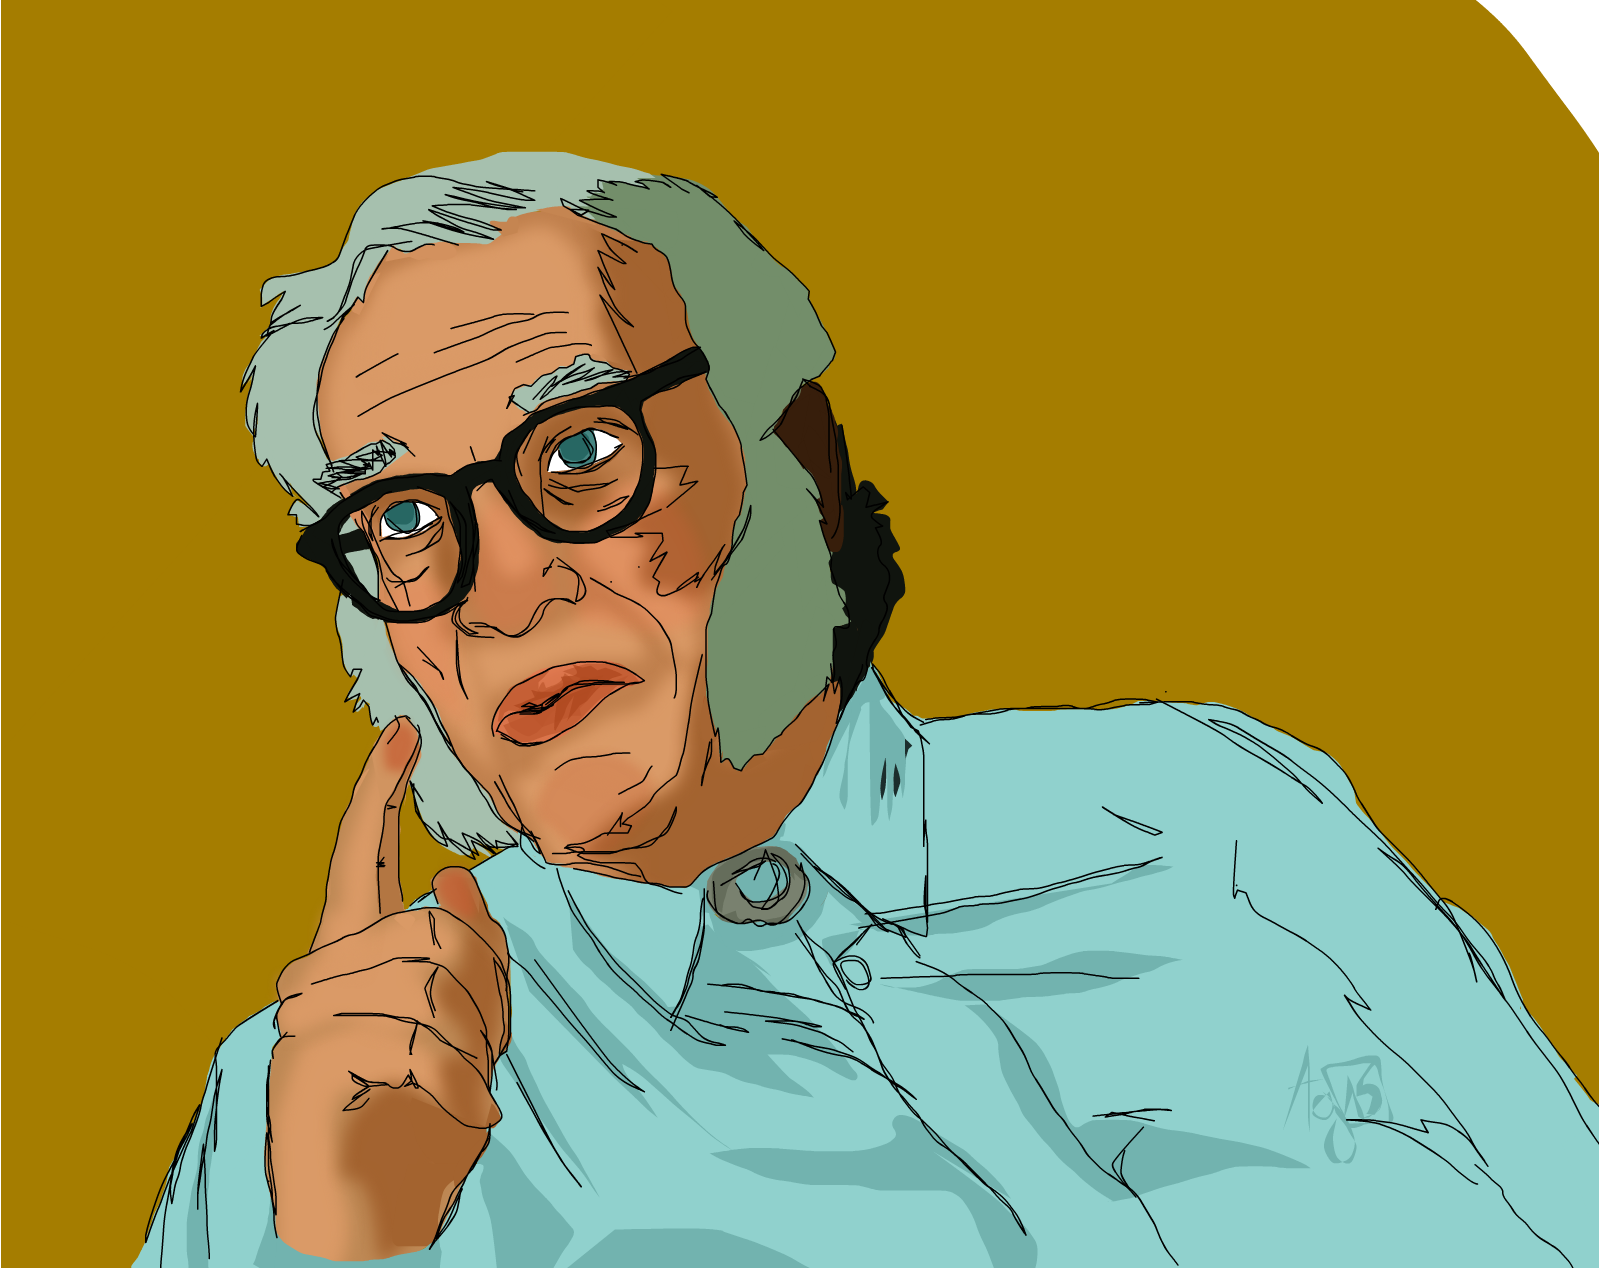 Asimov shares the tactics and strategies he developed to never run out of ideas again.